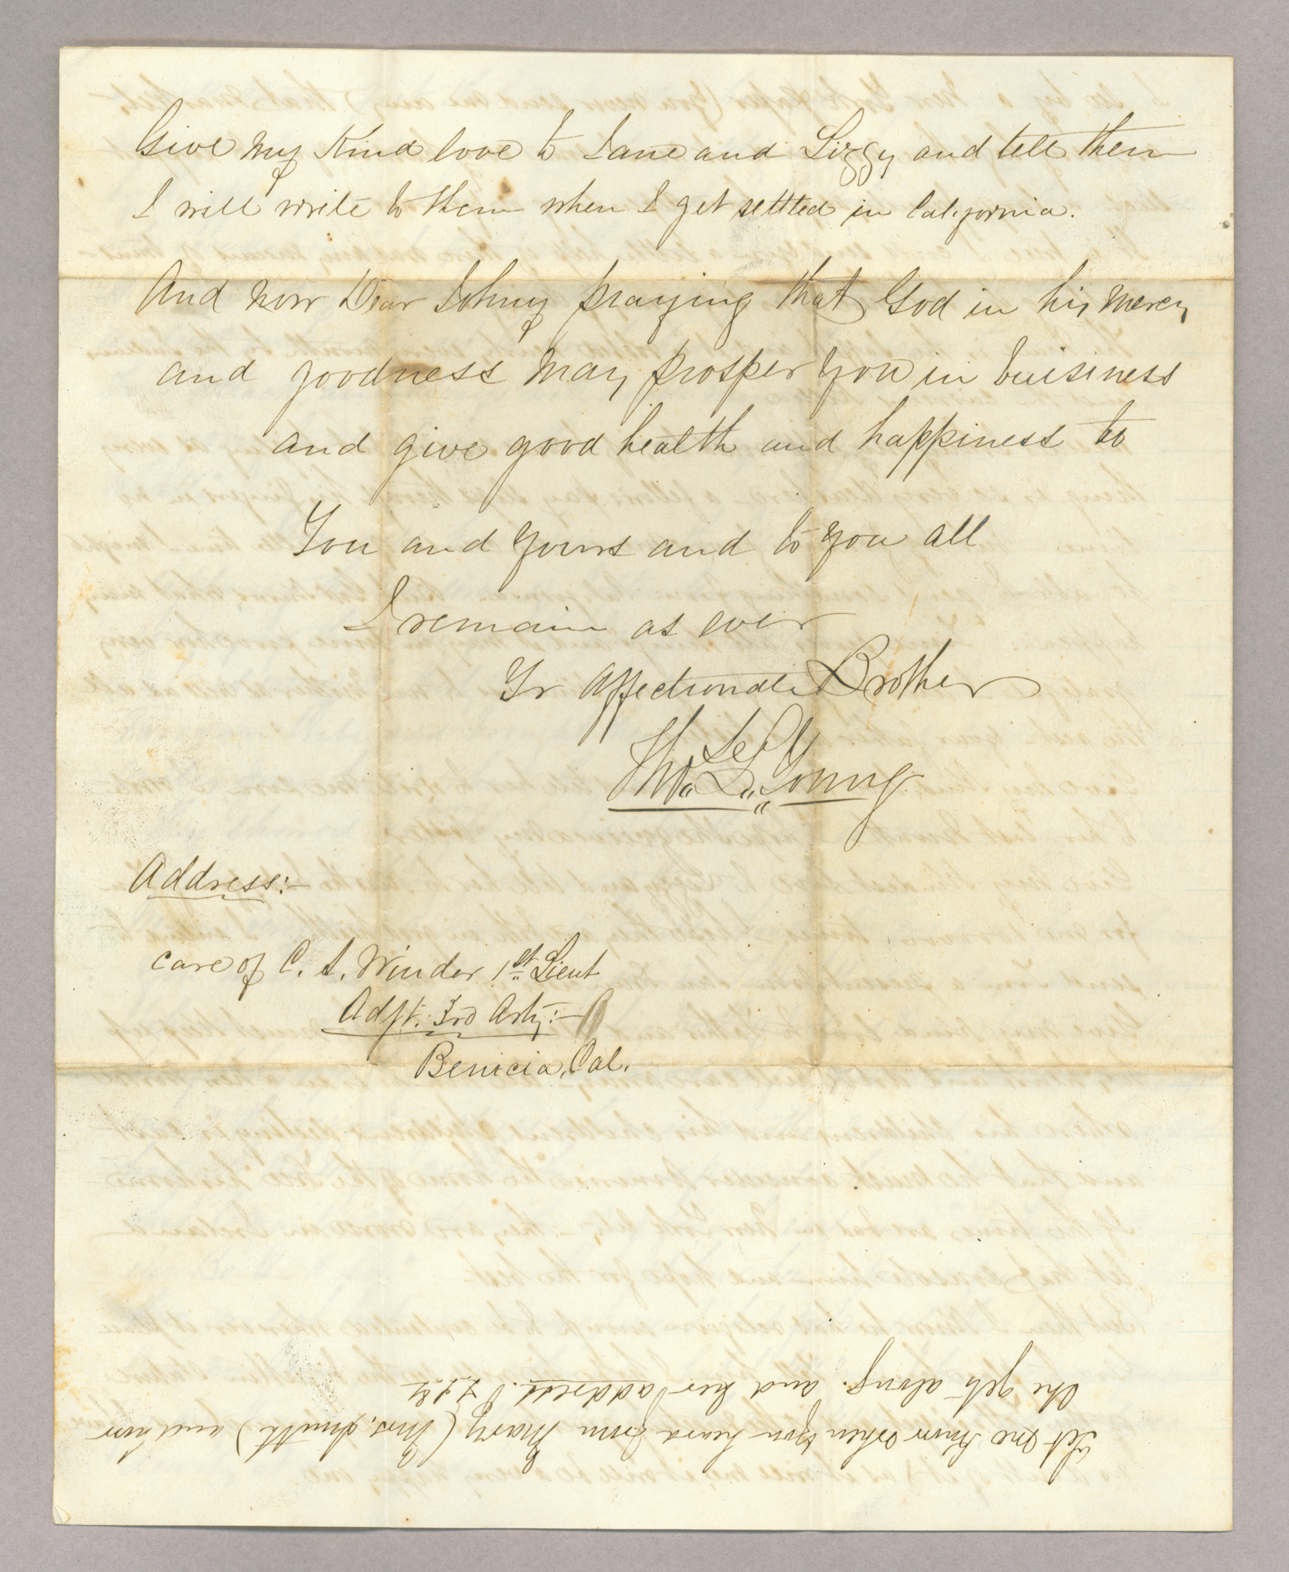 Letter. Tho[ma]s L[owry] Young, Great Salt Lake City, Utah Territory, to "Dear John" [John E. Brownlee], n. p., Page 4